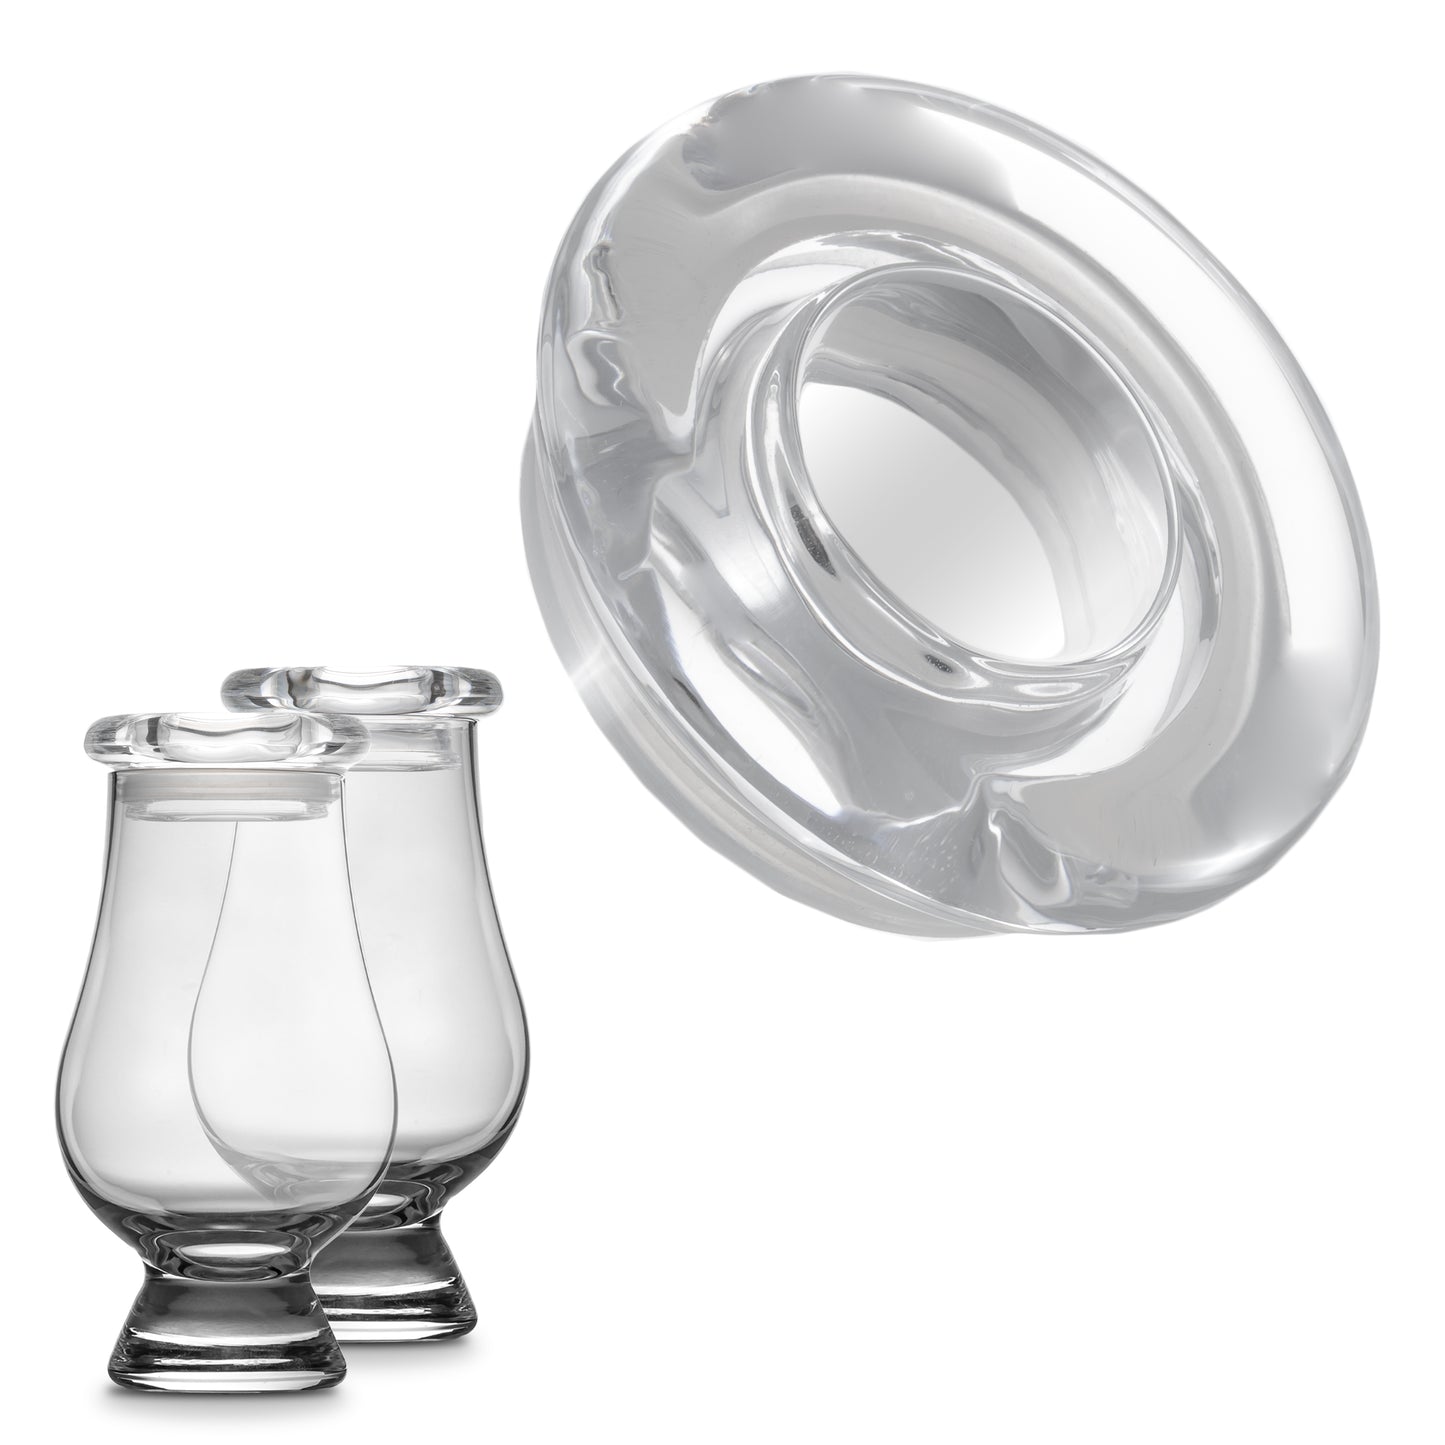 CairnCovers Glass Whiskey Glassware Lids - Glass Cap for Whisky Tasting Glasses by Cairn Craft (4 CairnCover Lids with Numeral Engraving)